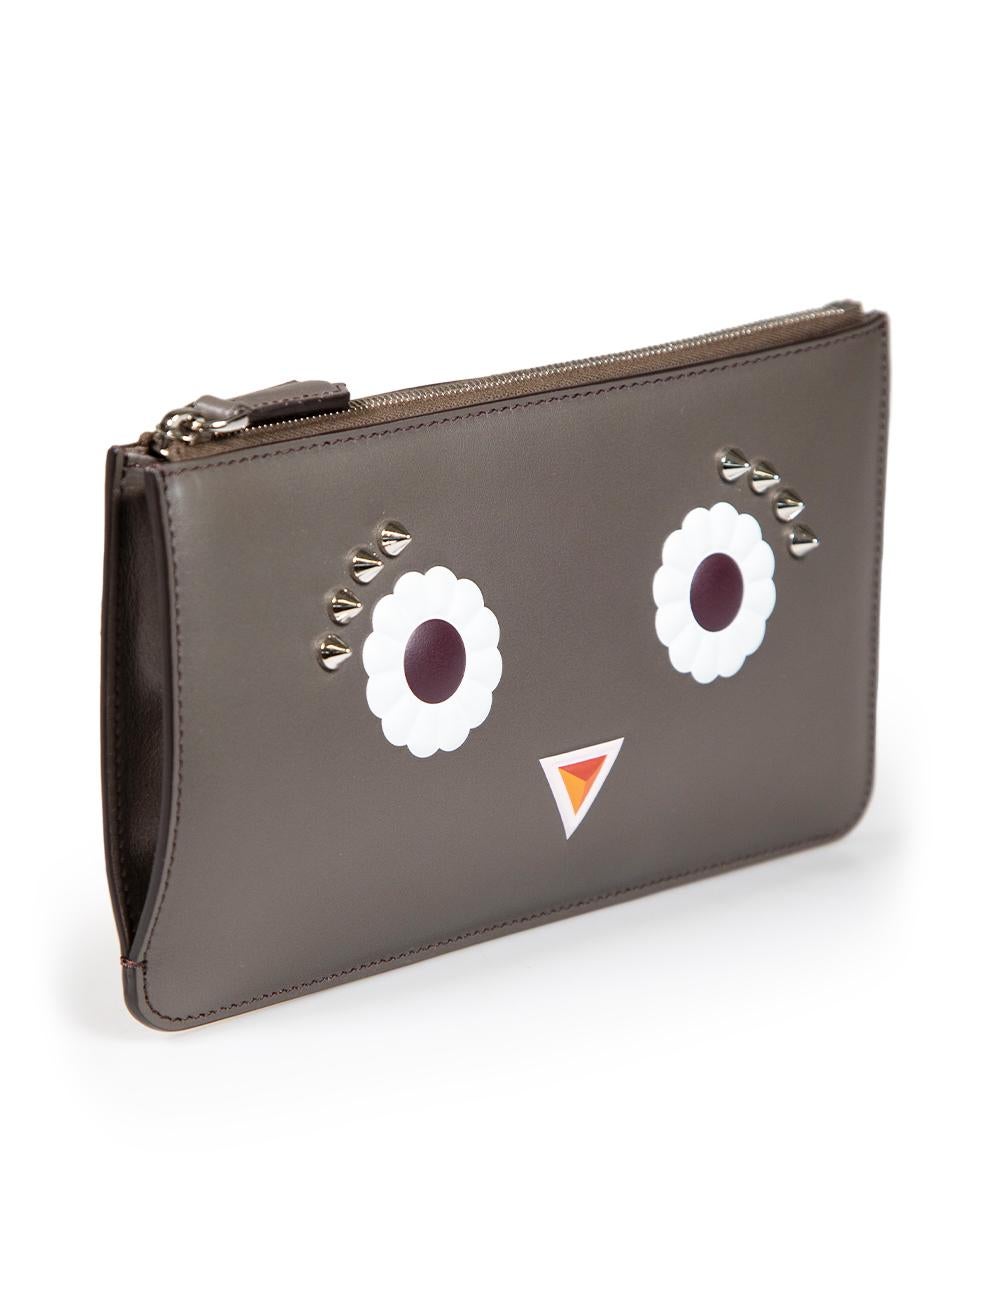 CONDITION is Never worn. No visible wear to pouch is evident. However, due to poor storage there is a small scratch to the embellishment on the left side on this new Fendi designer resale item. This item comes with original dust bag.
 
 
 
 Details
